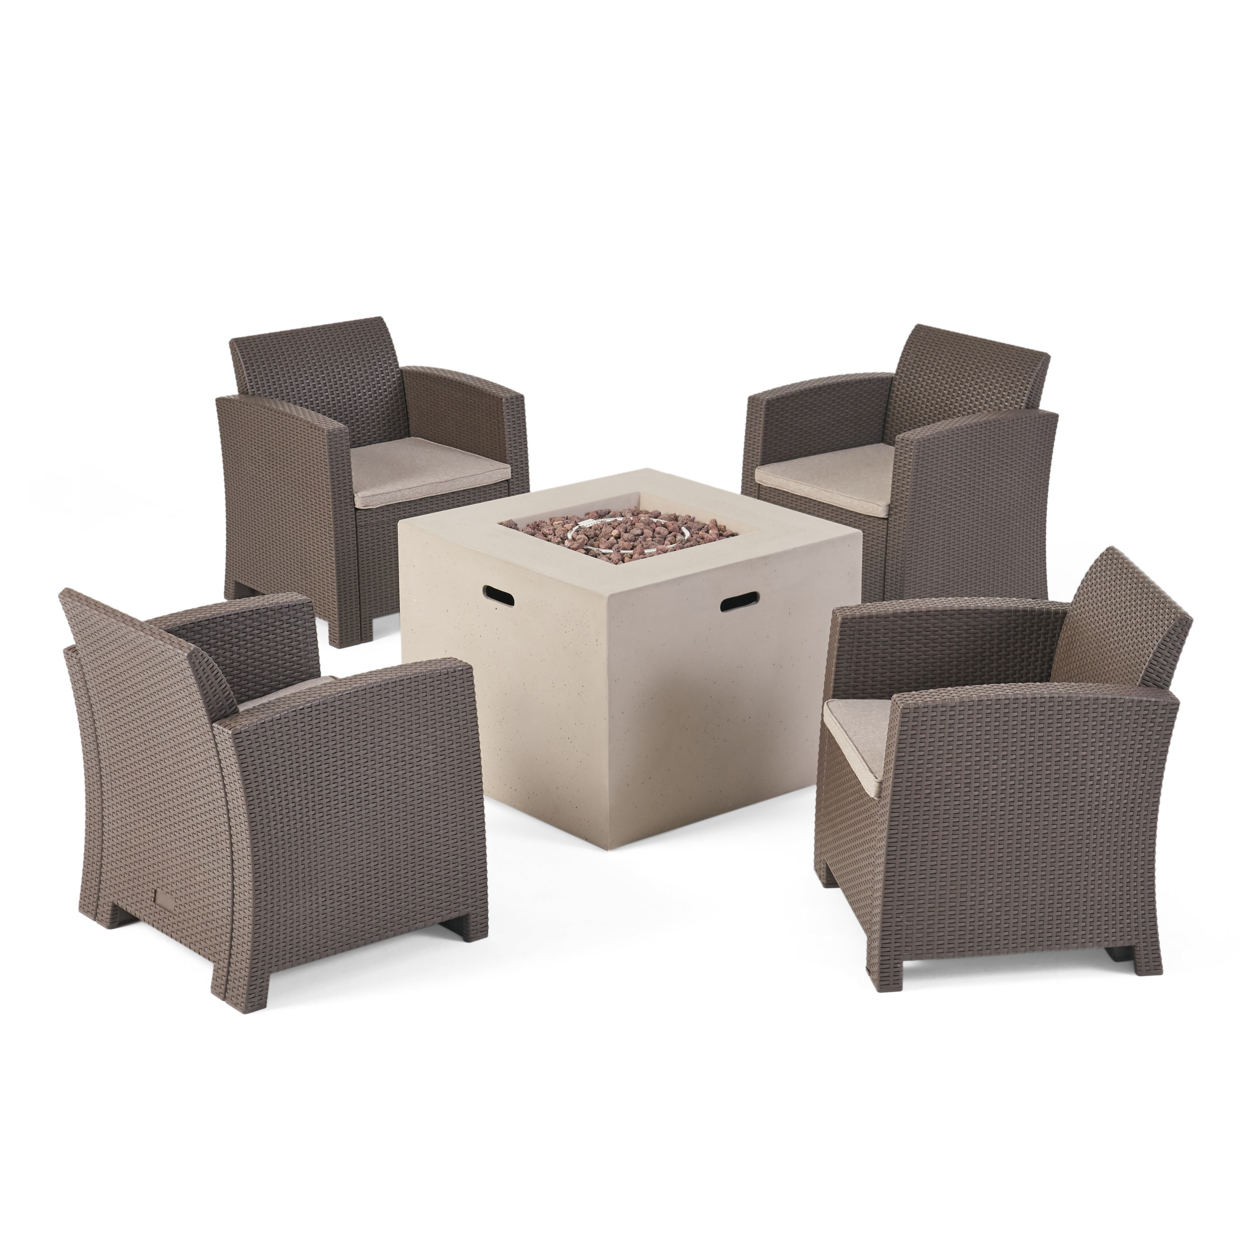 Houston Outdoor 4-Seater Wicker Print Chat Set With Propane Fire Pit - Brown + Mixed Biege + Light Gray